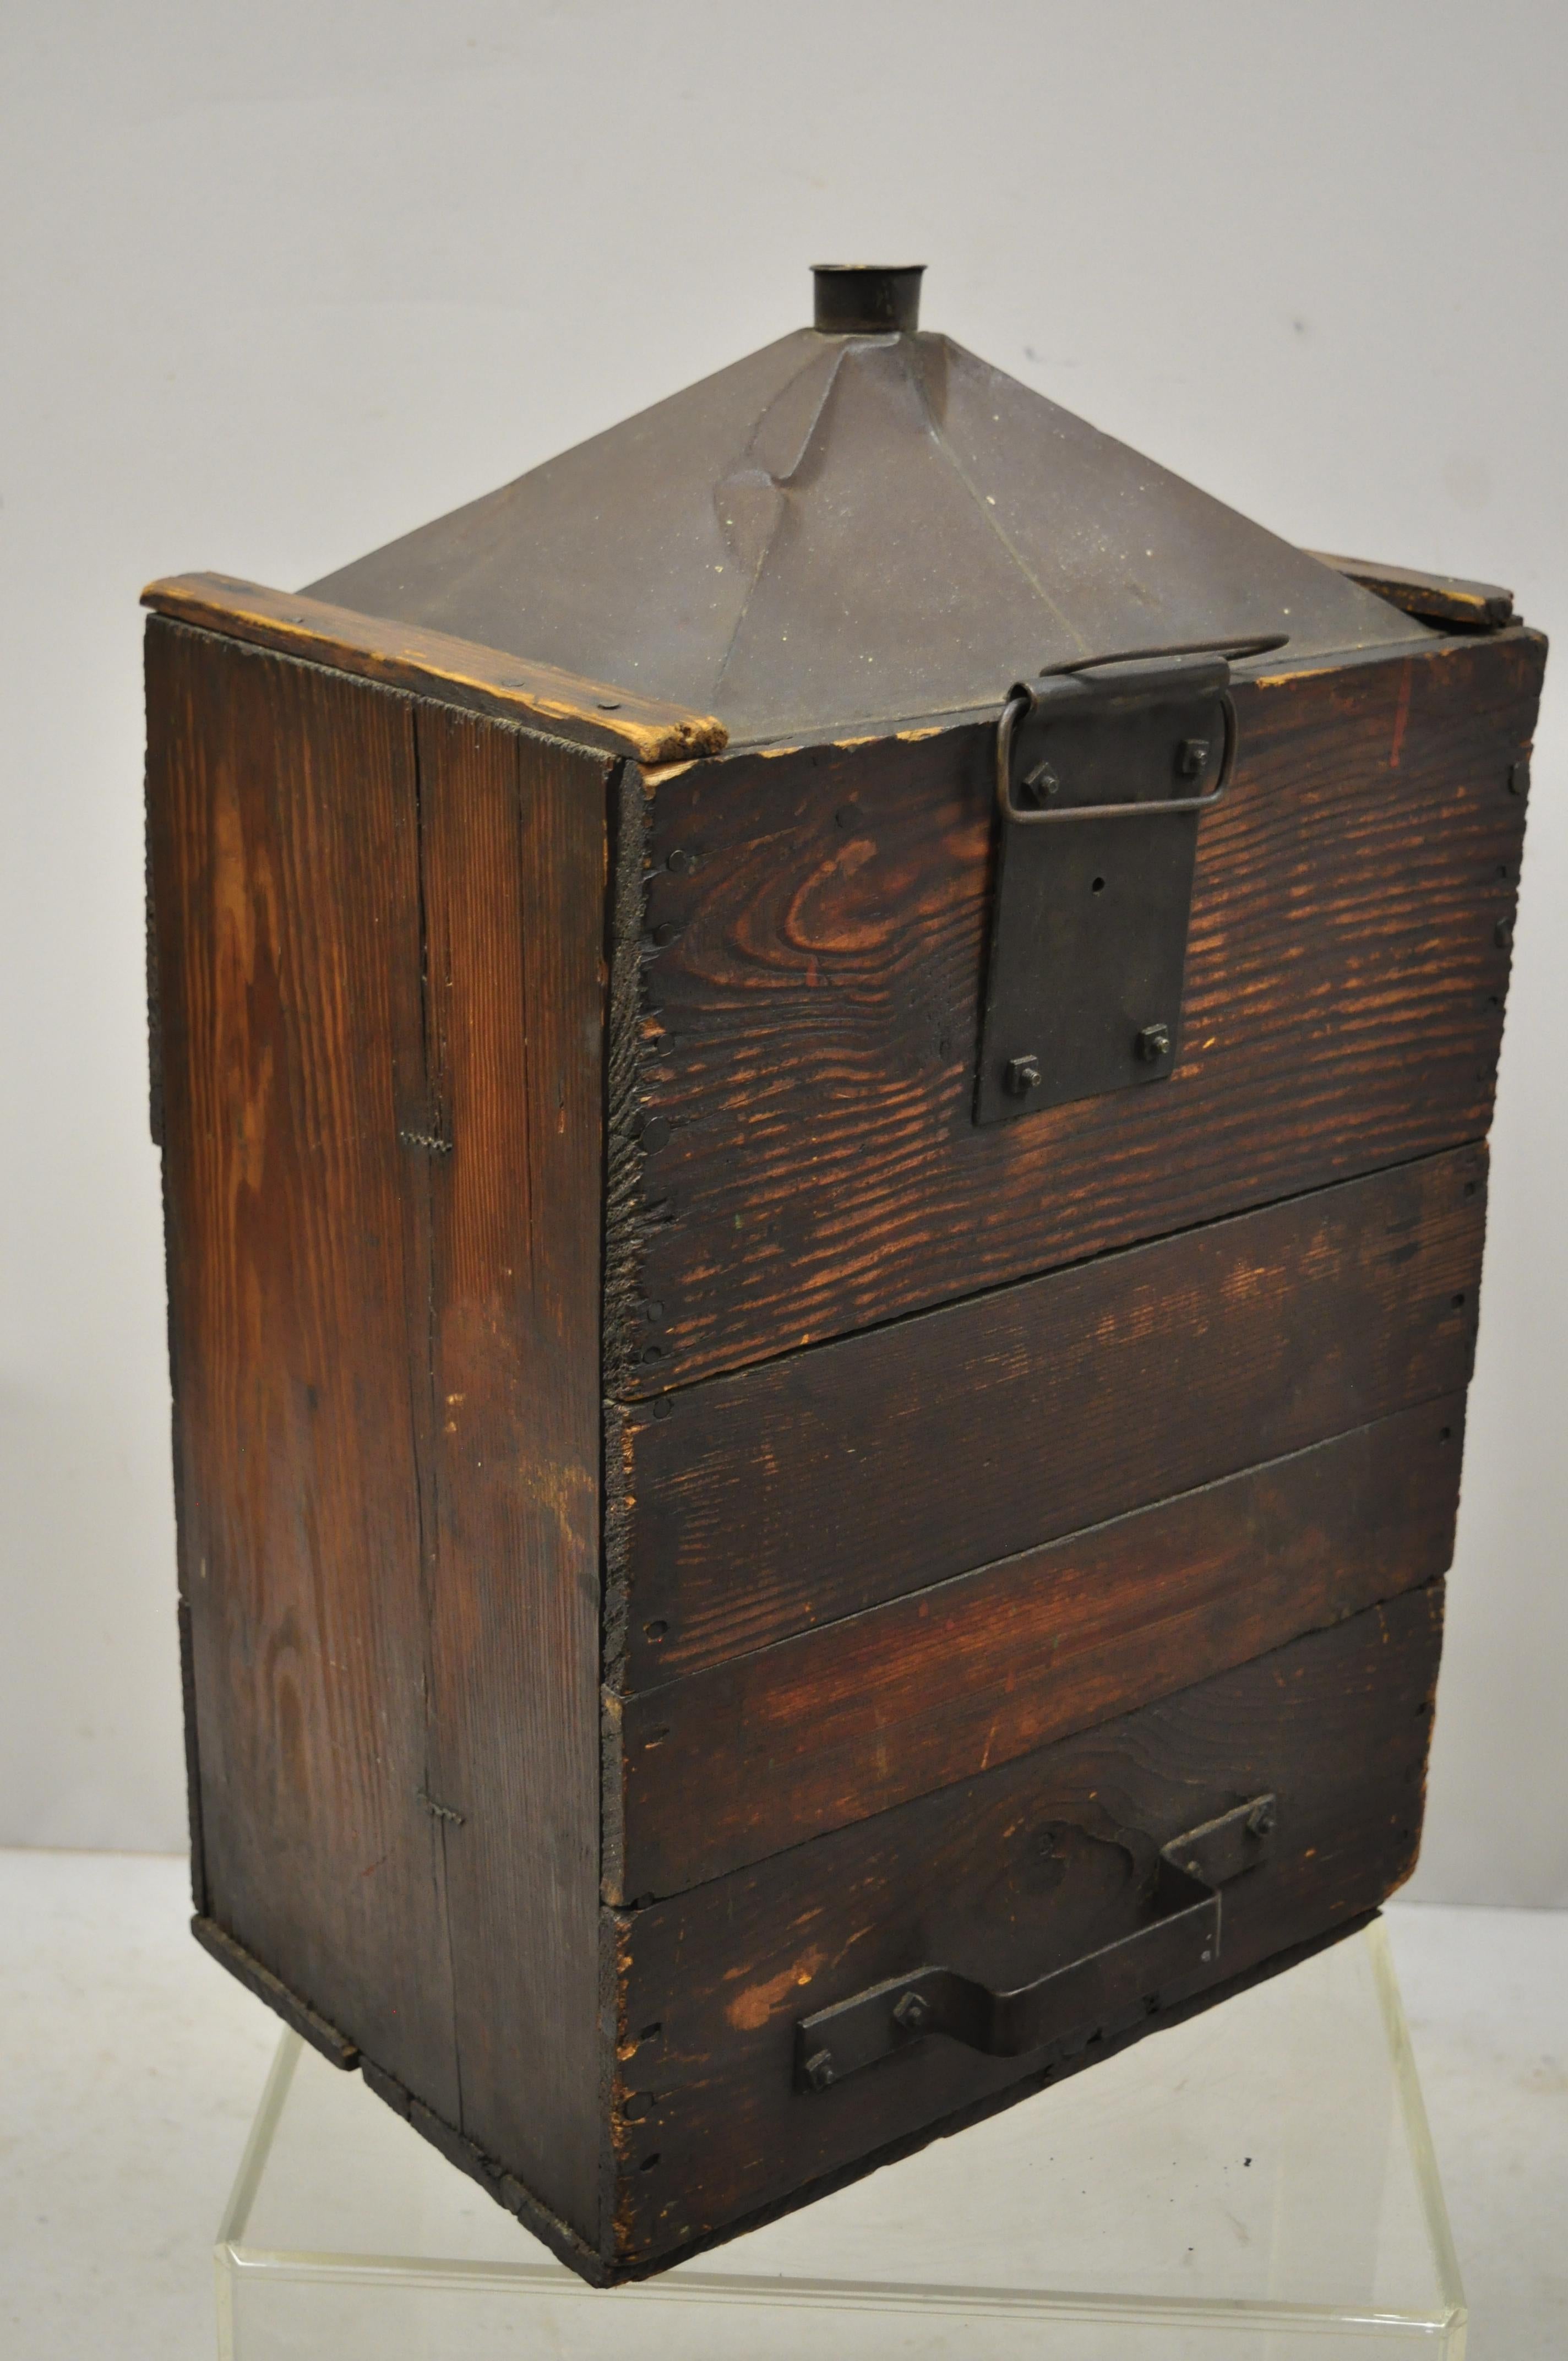 Antique export tin metal transport canister container with wood case. Item features a solid wood frame, galvanized tin metal container, remnants of cork to mouth of canister, very nice antique item. Believed to be a 5 gallon container and believed